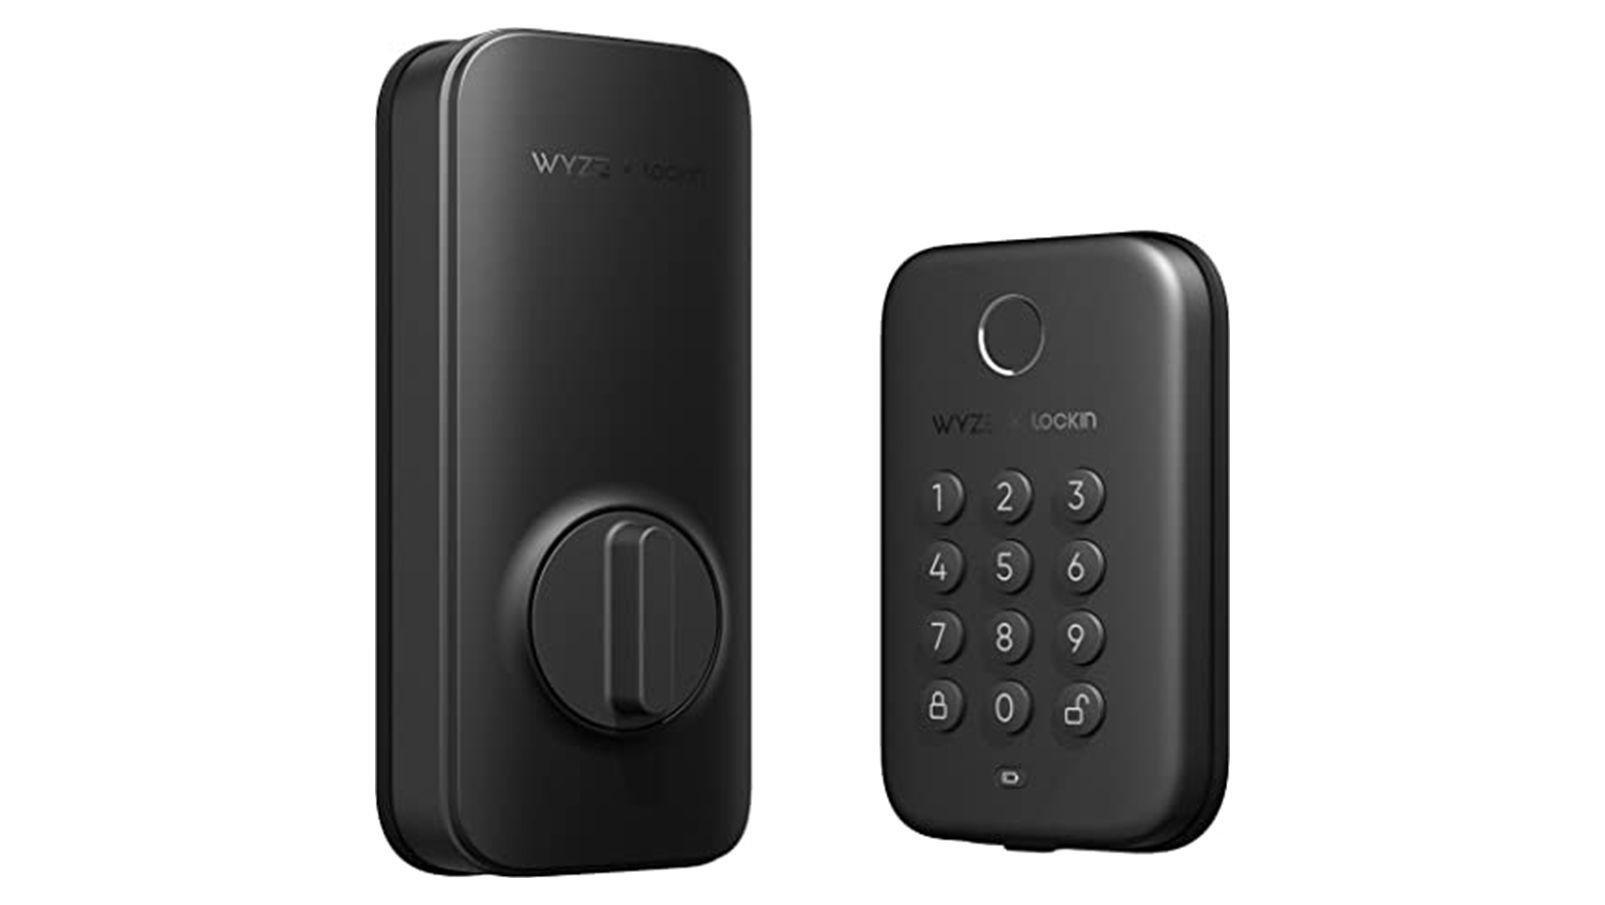 Review: A High-Tech Door Lock That's Also Simple - Vox